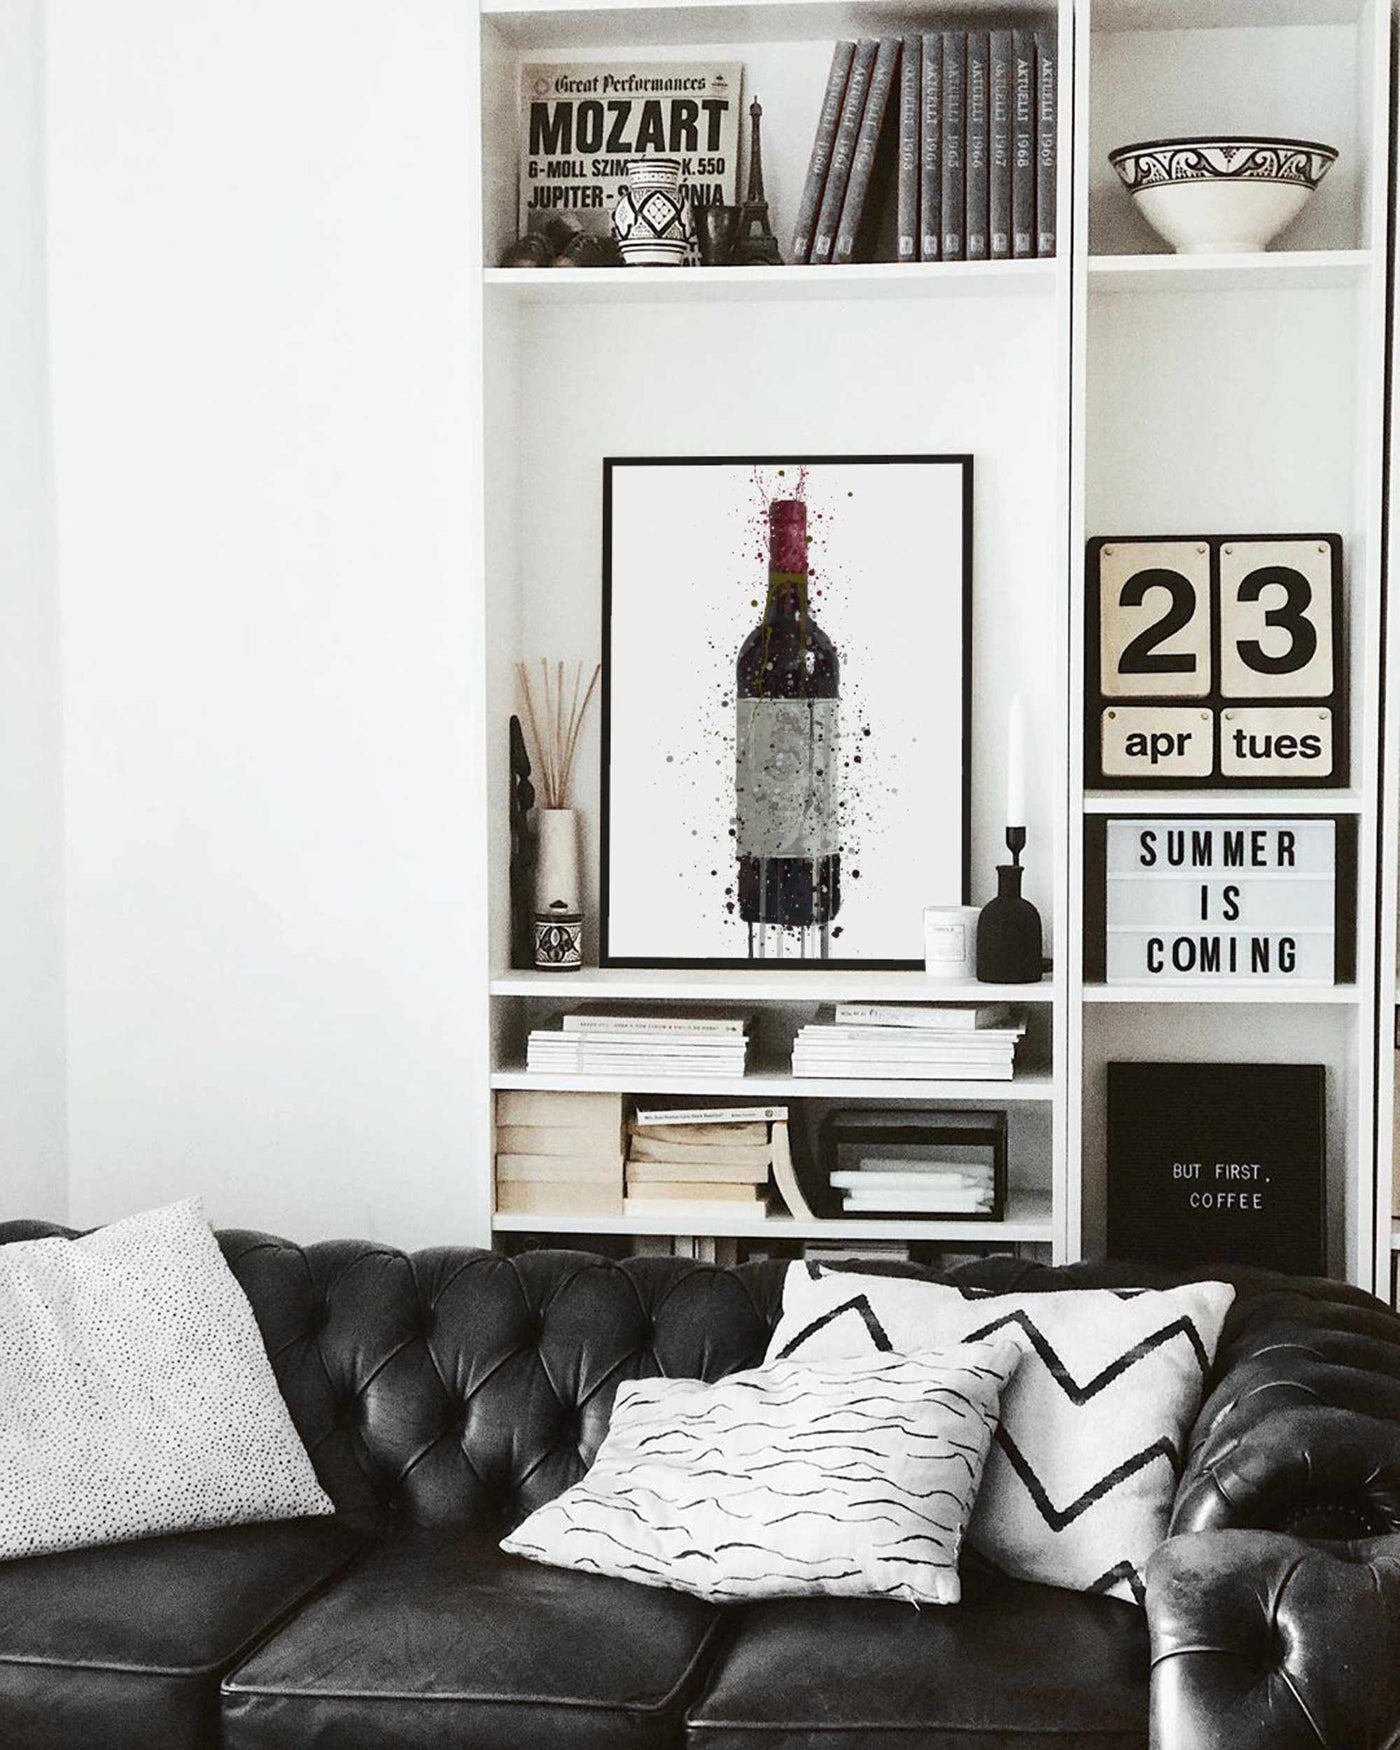 Red Wine Bottle Wall Art Print 'Tinto'